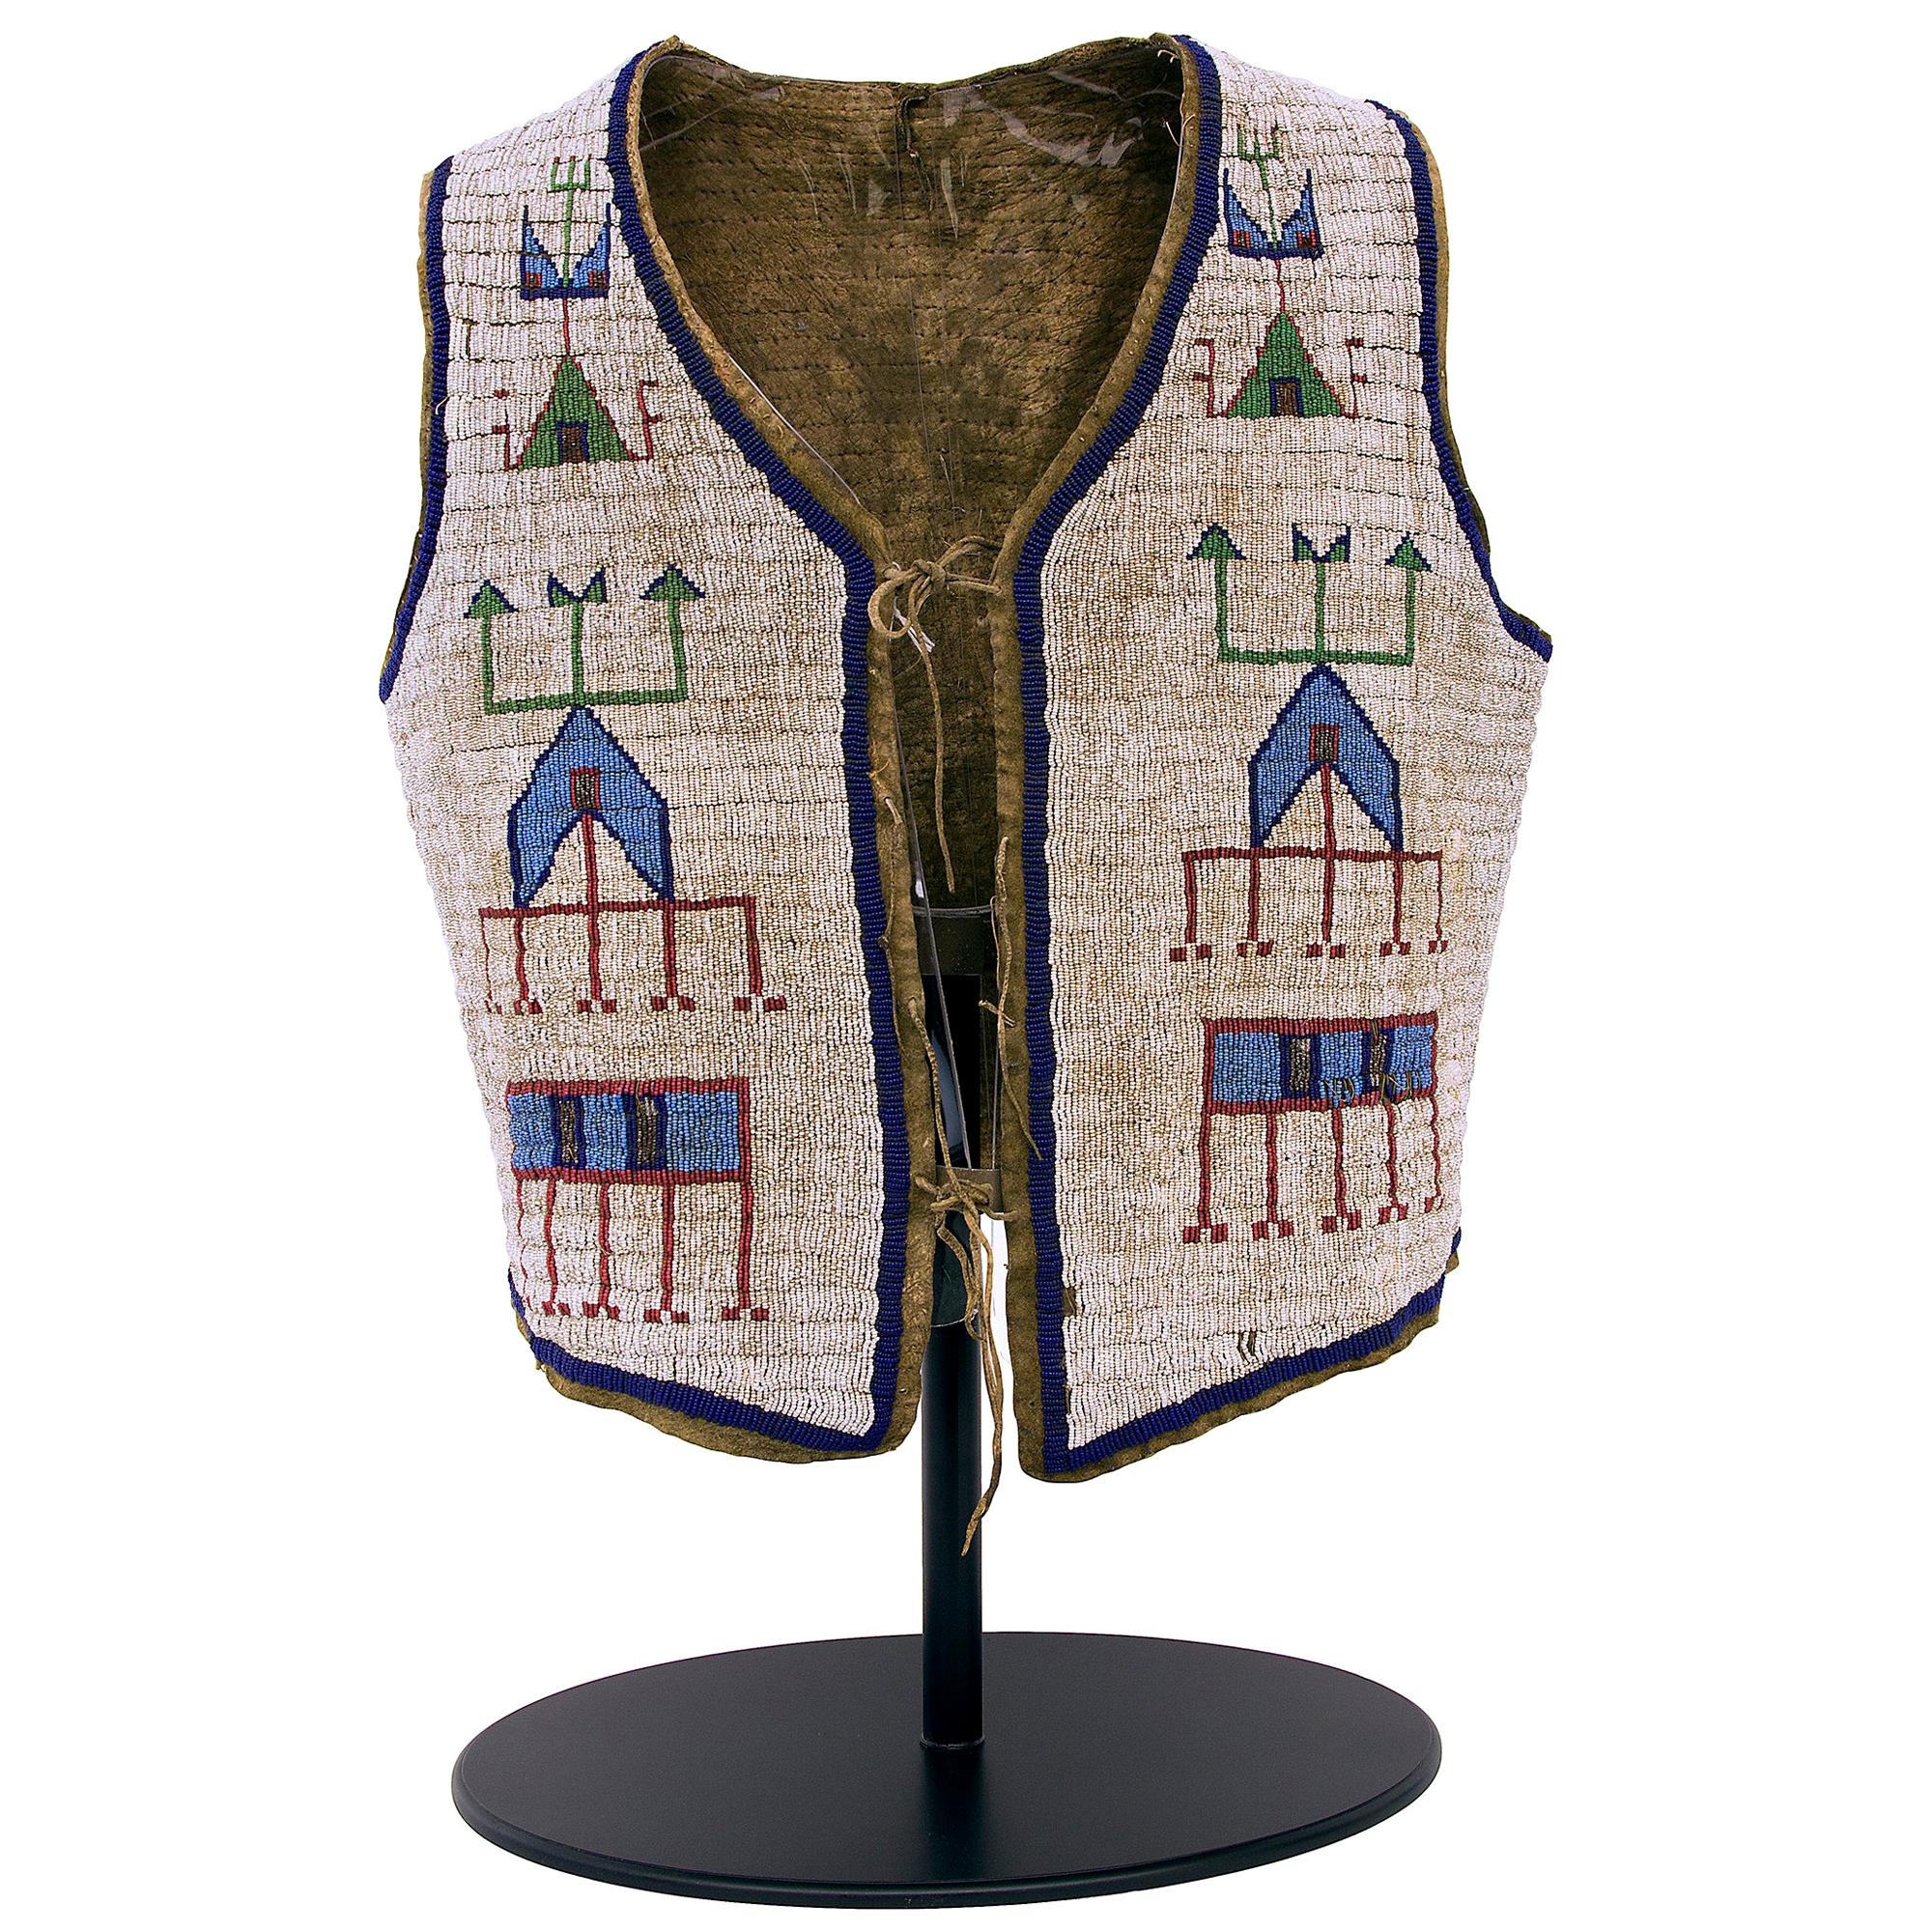 Antique Sioux 'Plains' Beaded Vest with Stand, 19th Century Native American Art